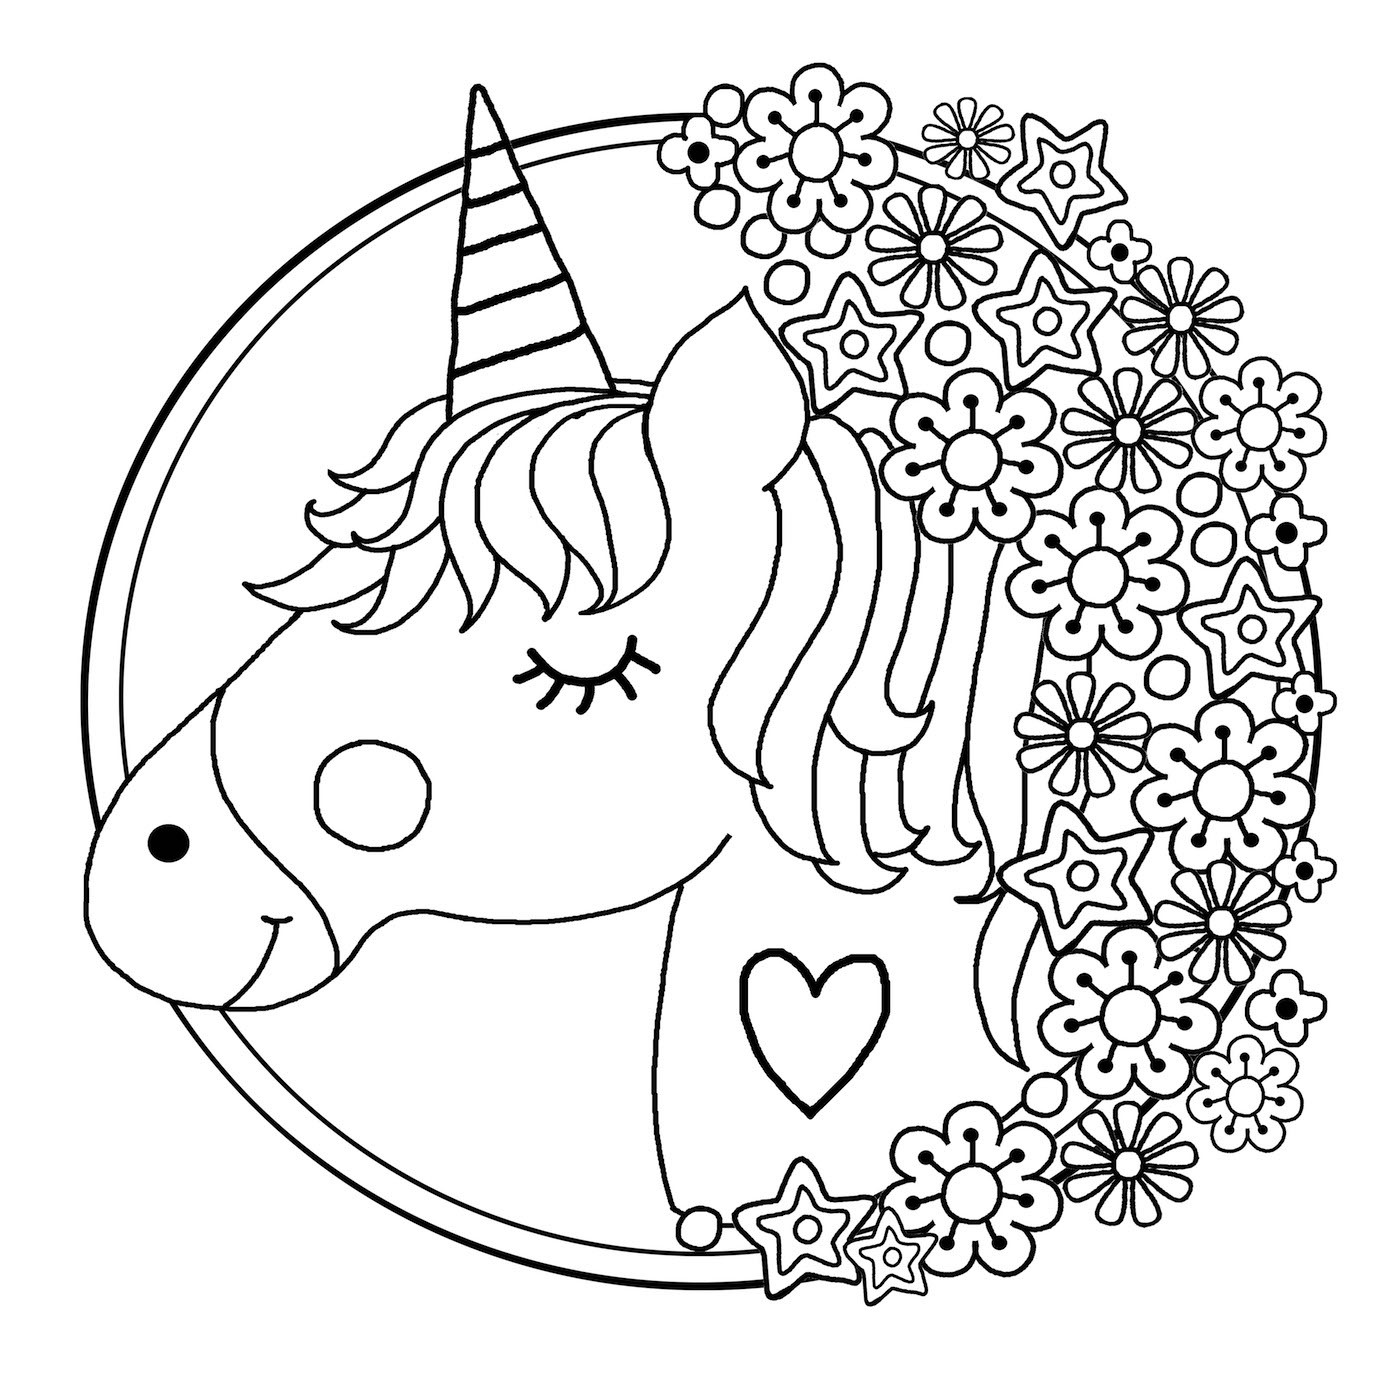 Printable Coloring Pages Of Unicorns
 Downloadable unicorn colouring page Michael O Mara Books